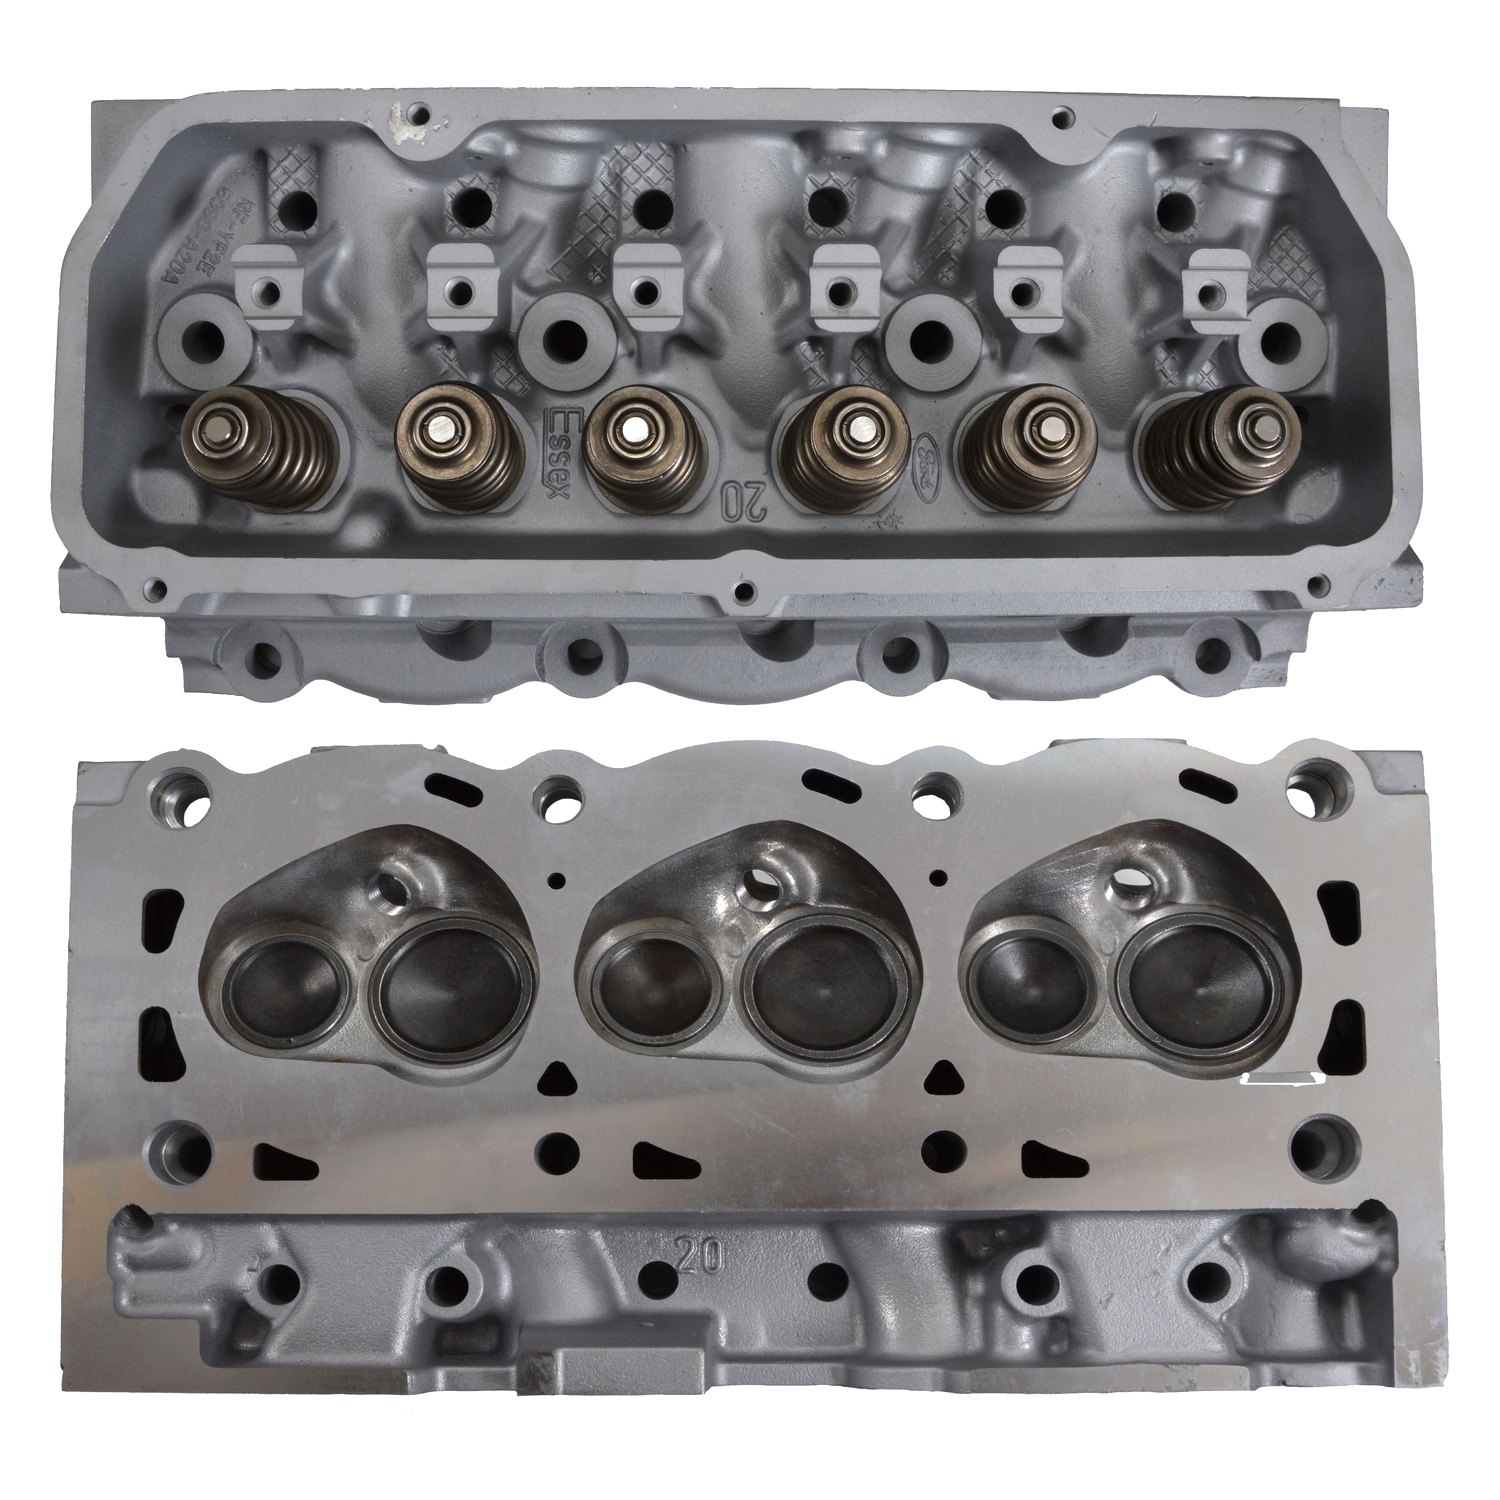 Enginetech® Ch1036r Remanufactured Complete Cylinder Head